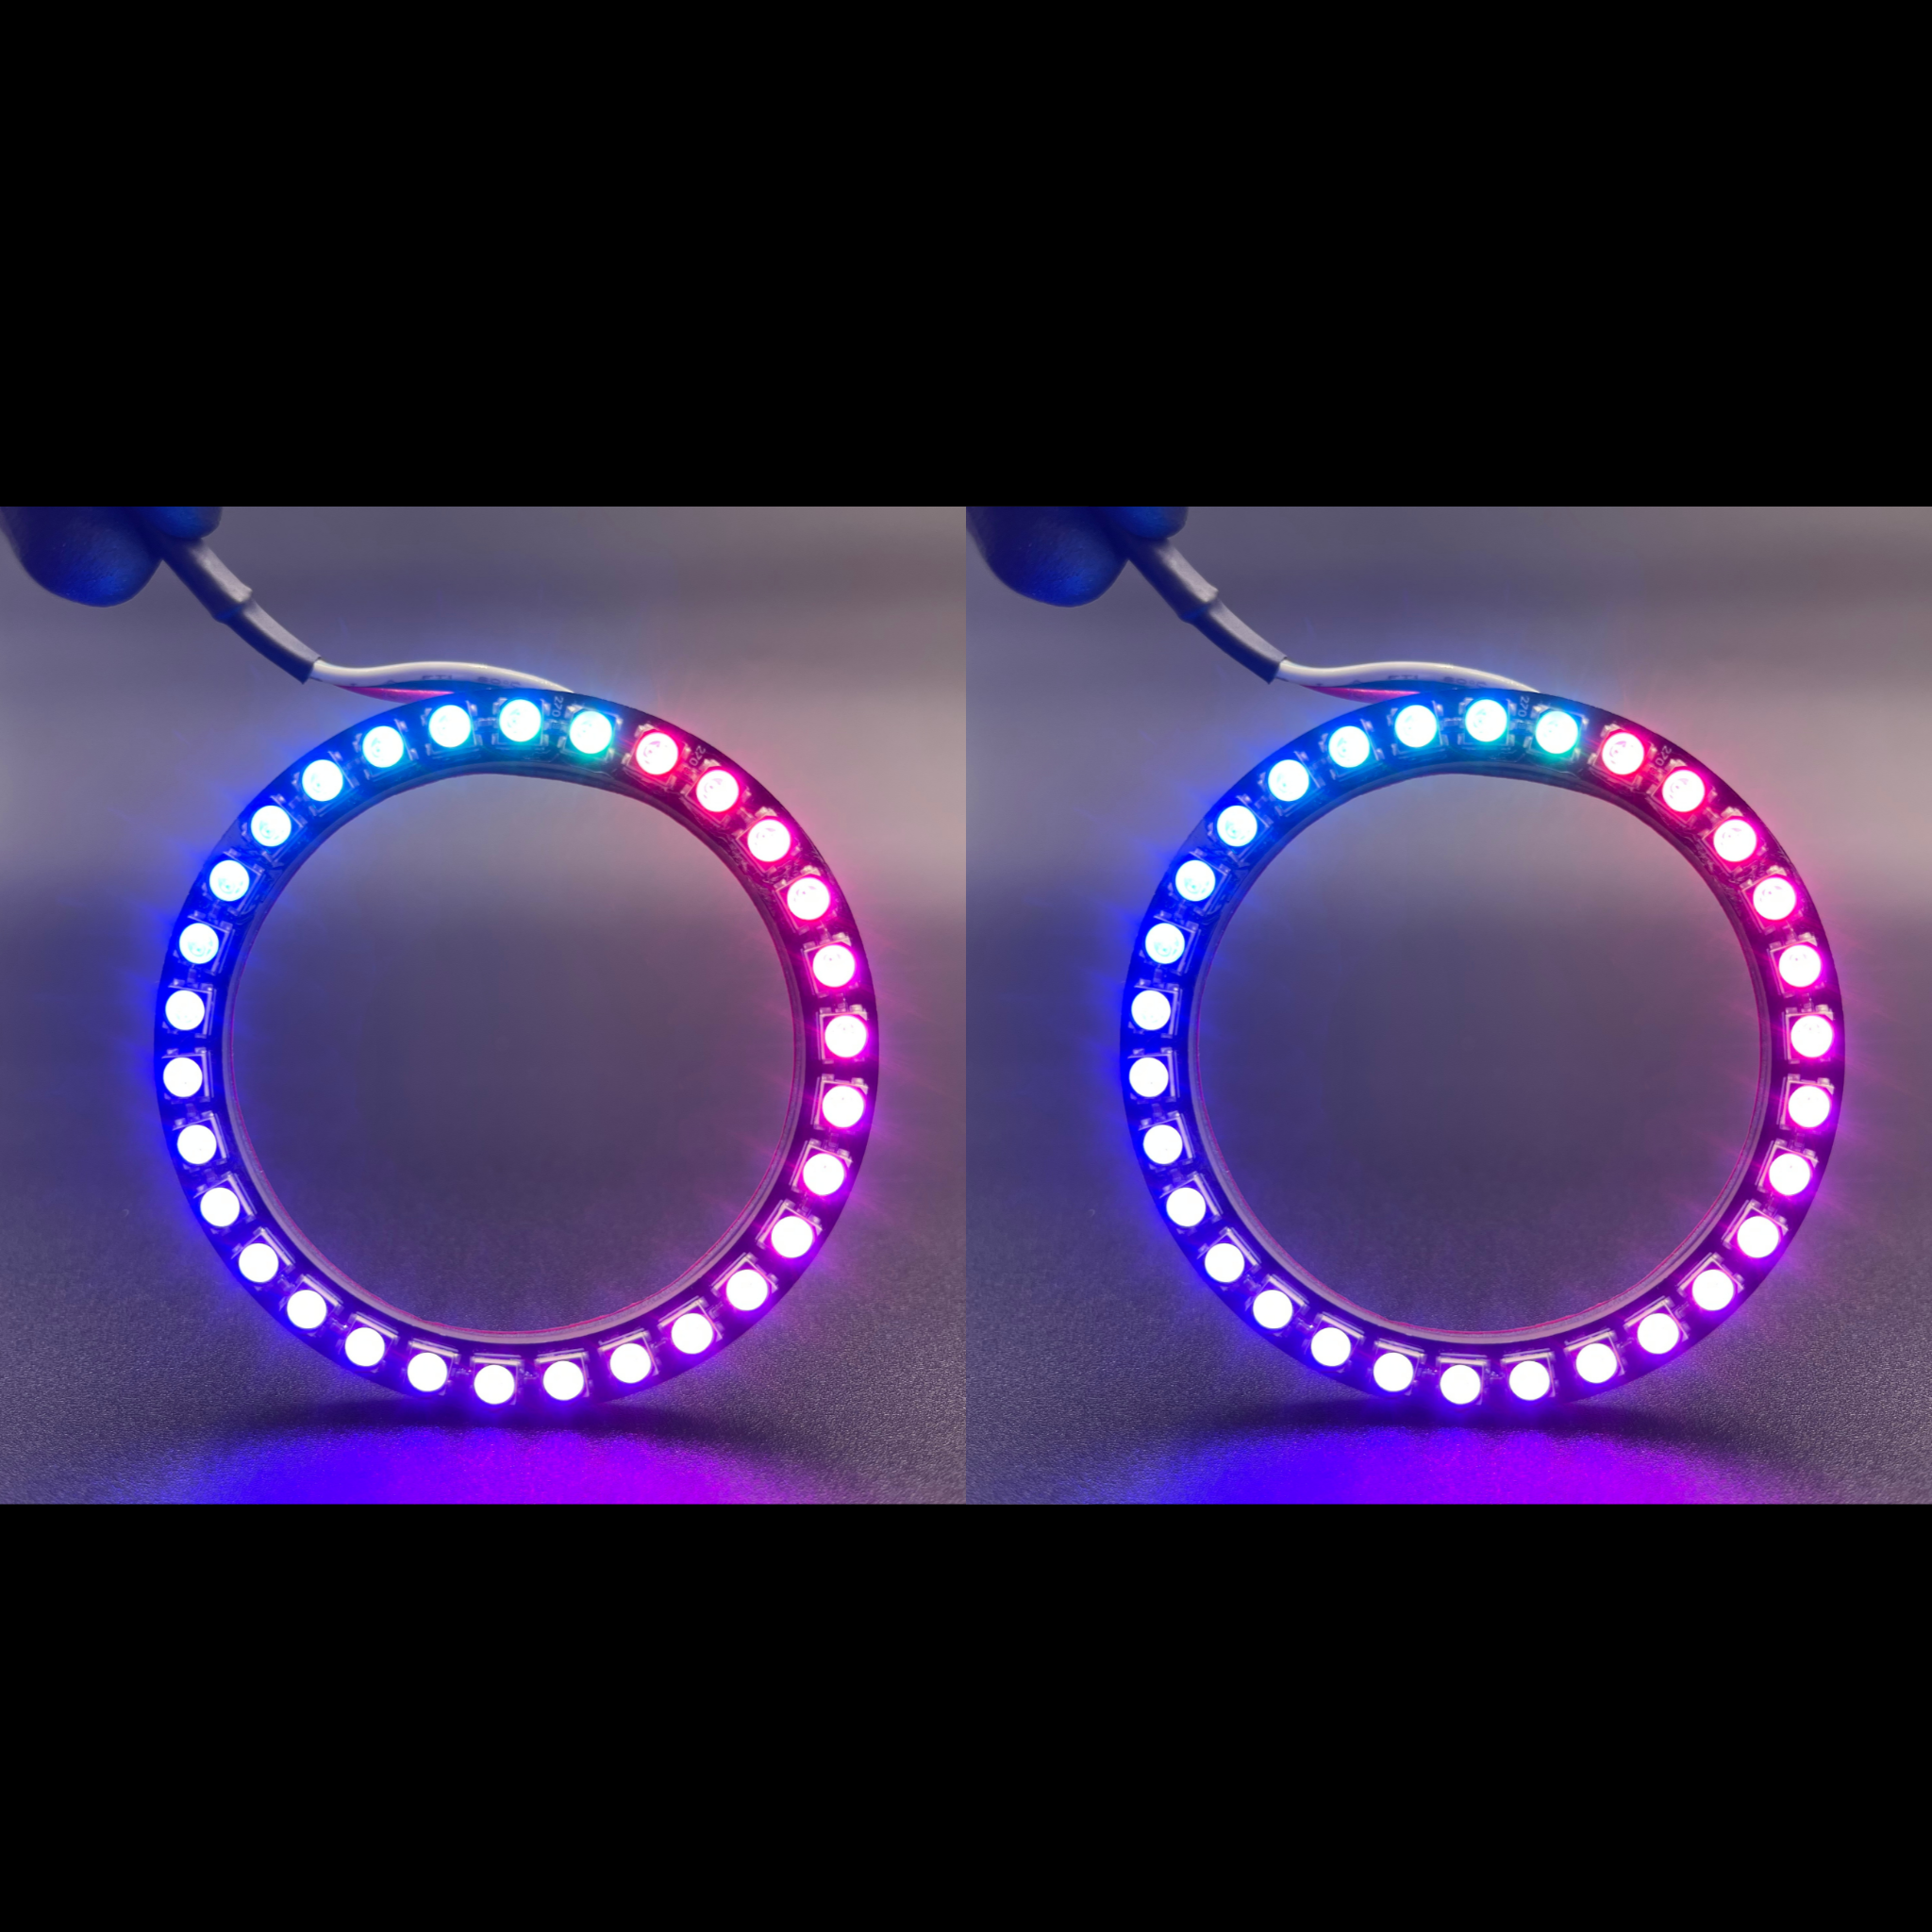 2000-2004 Ford Excursion Multicolor Halo Kit - RGB Halo Kits Multicolor Flow Series Color Chasing RGBWA LED headlight kit Oracle Lighting Trendz OneUpLighting Morimoto theretrofitsource AutoLEDTech Diode Dynamics